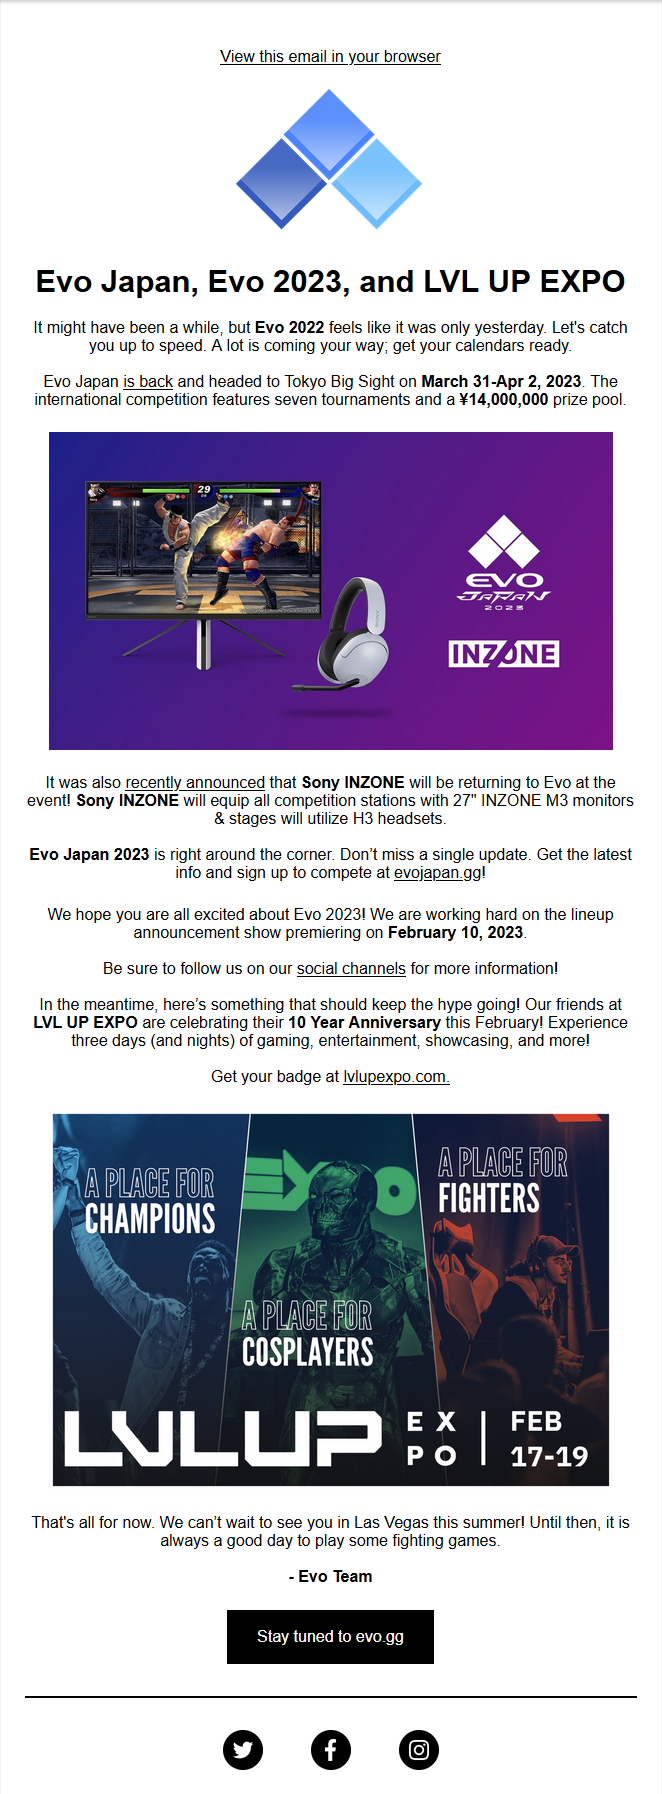 Email from Evo Japan